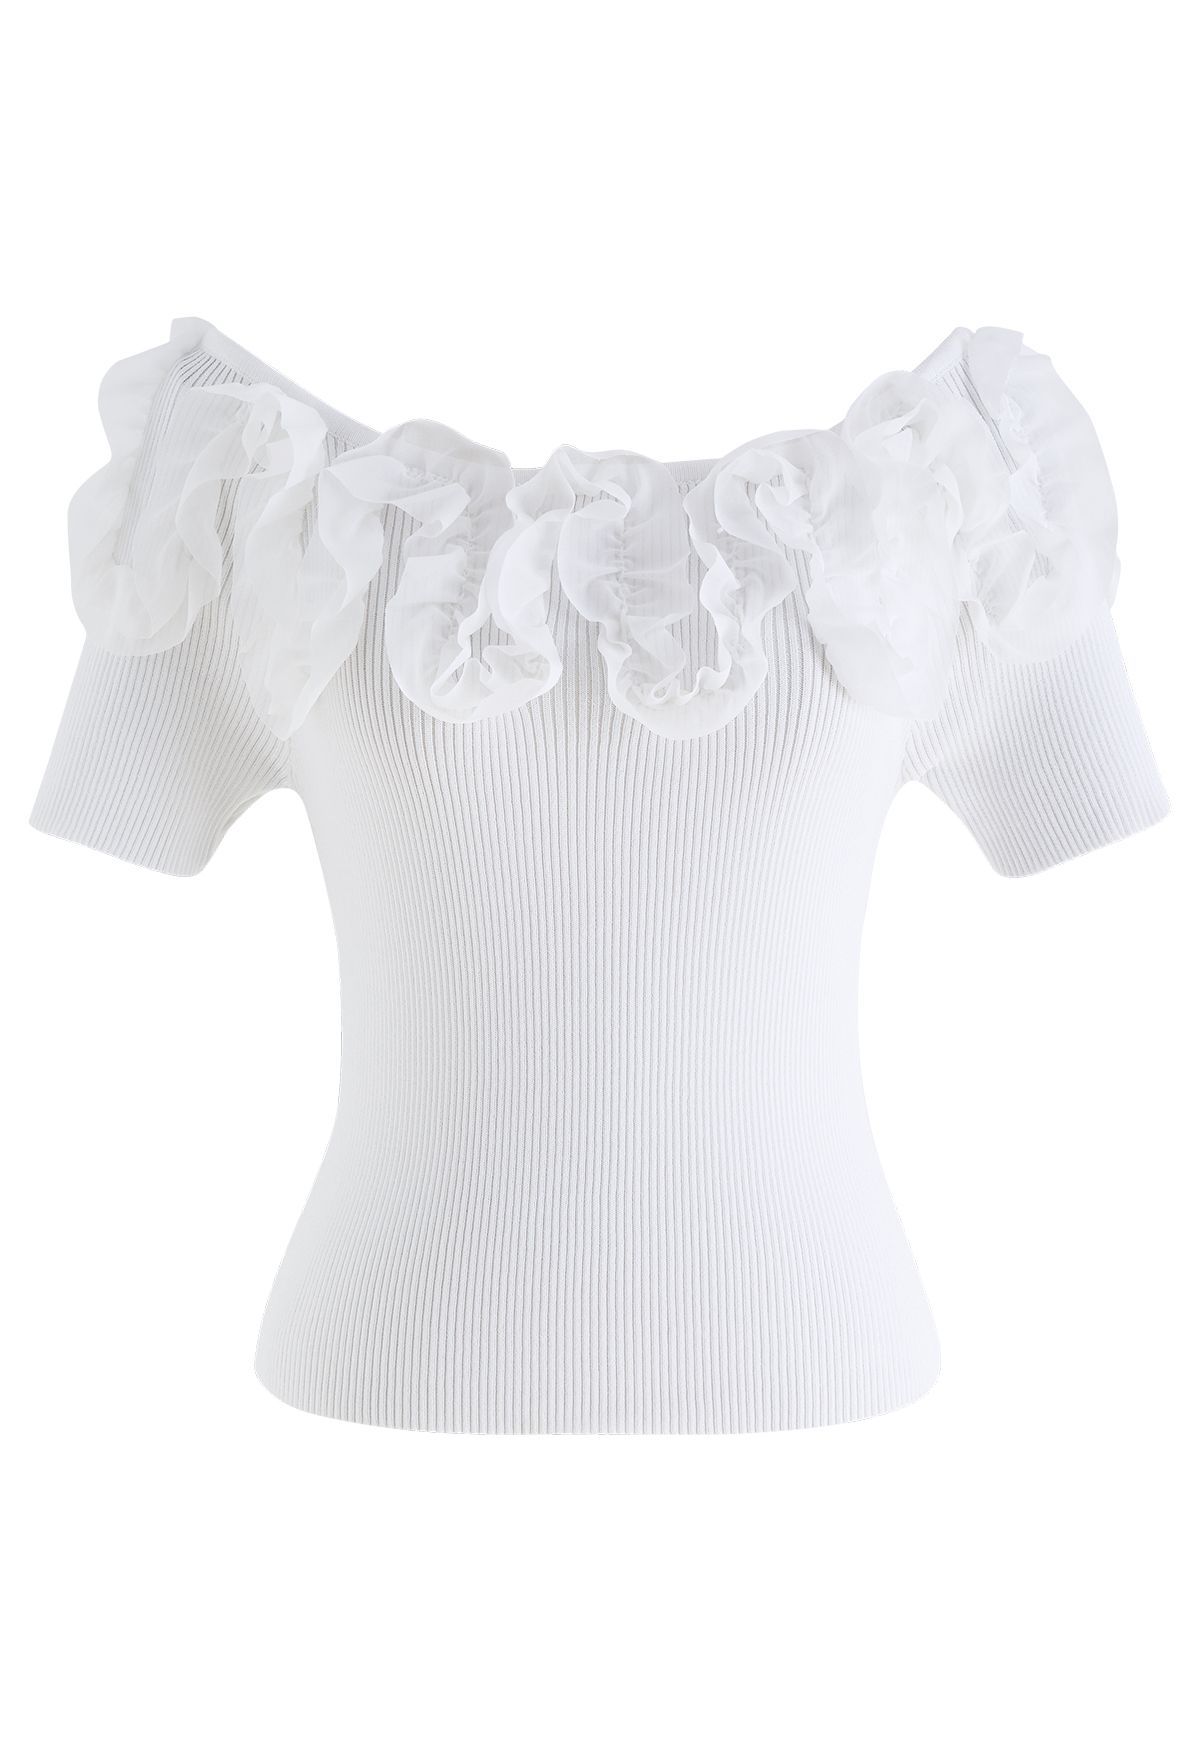 Ruffle Mesh Boat Neck Knit Top in White | Chicwish